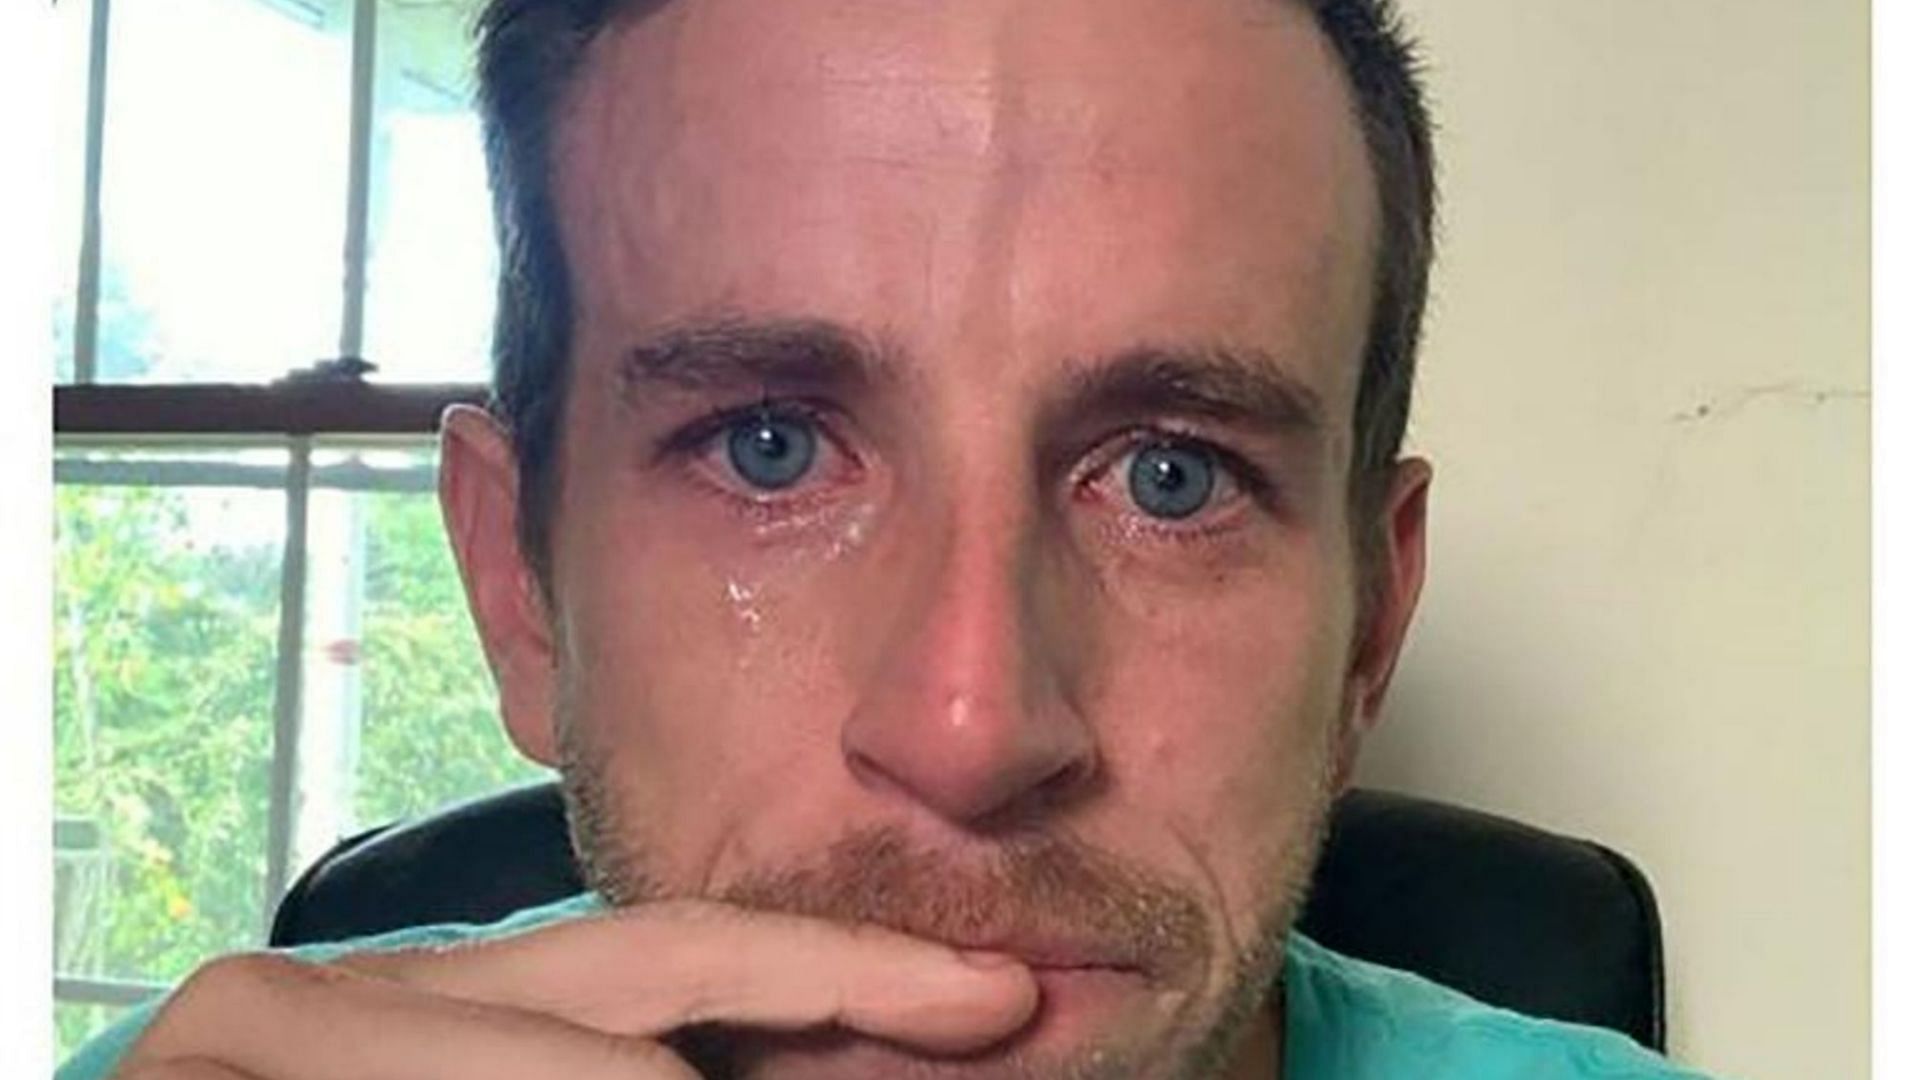 CEO goes viral for crying about company lay offs on LinkedIn (Image via bradenwallake/LinkedIn)